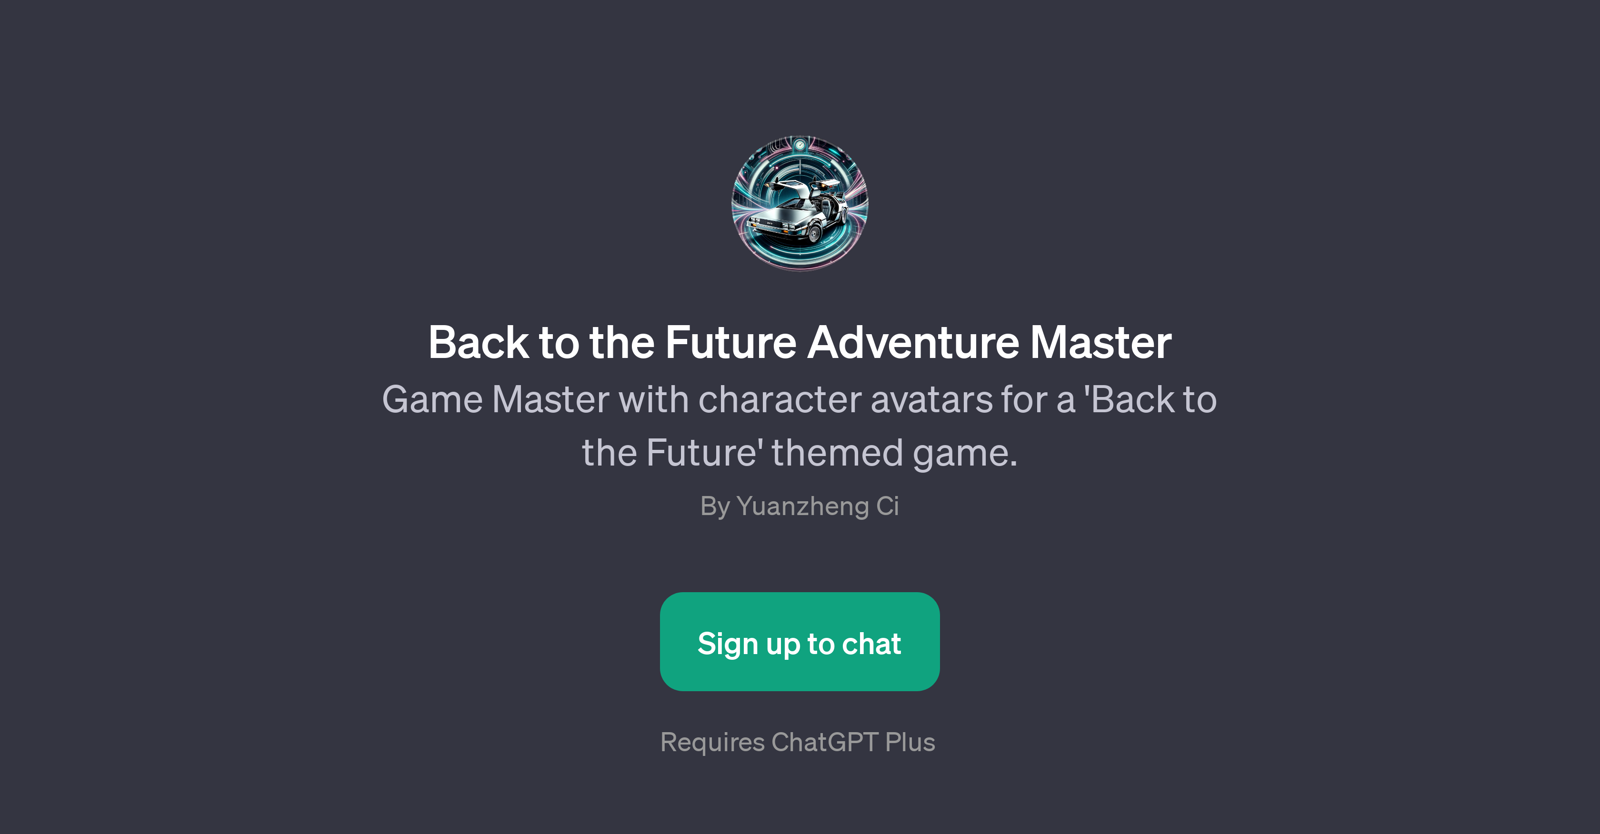 Back to the Future Adventure Master website